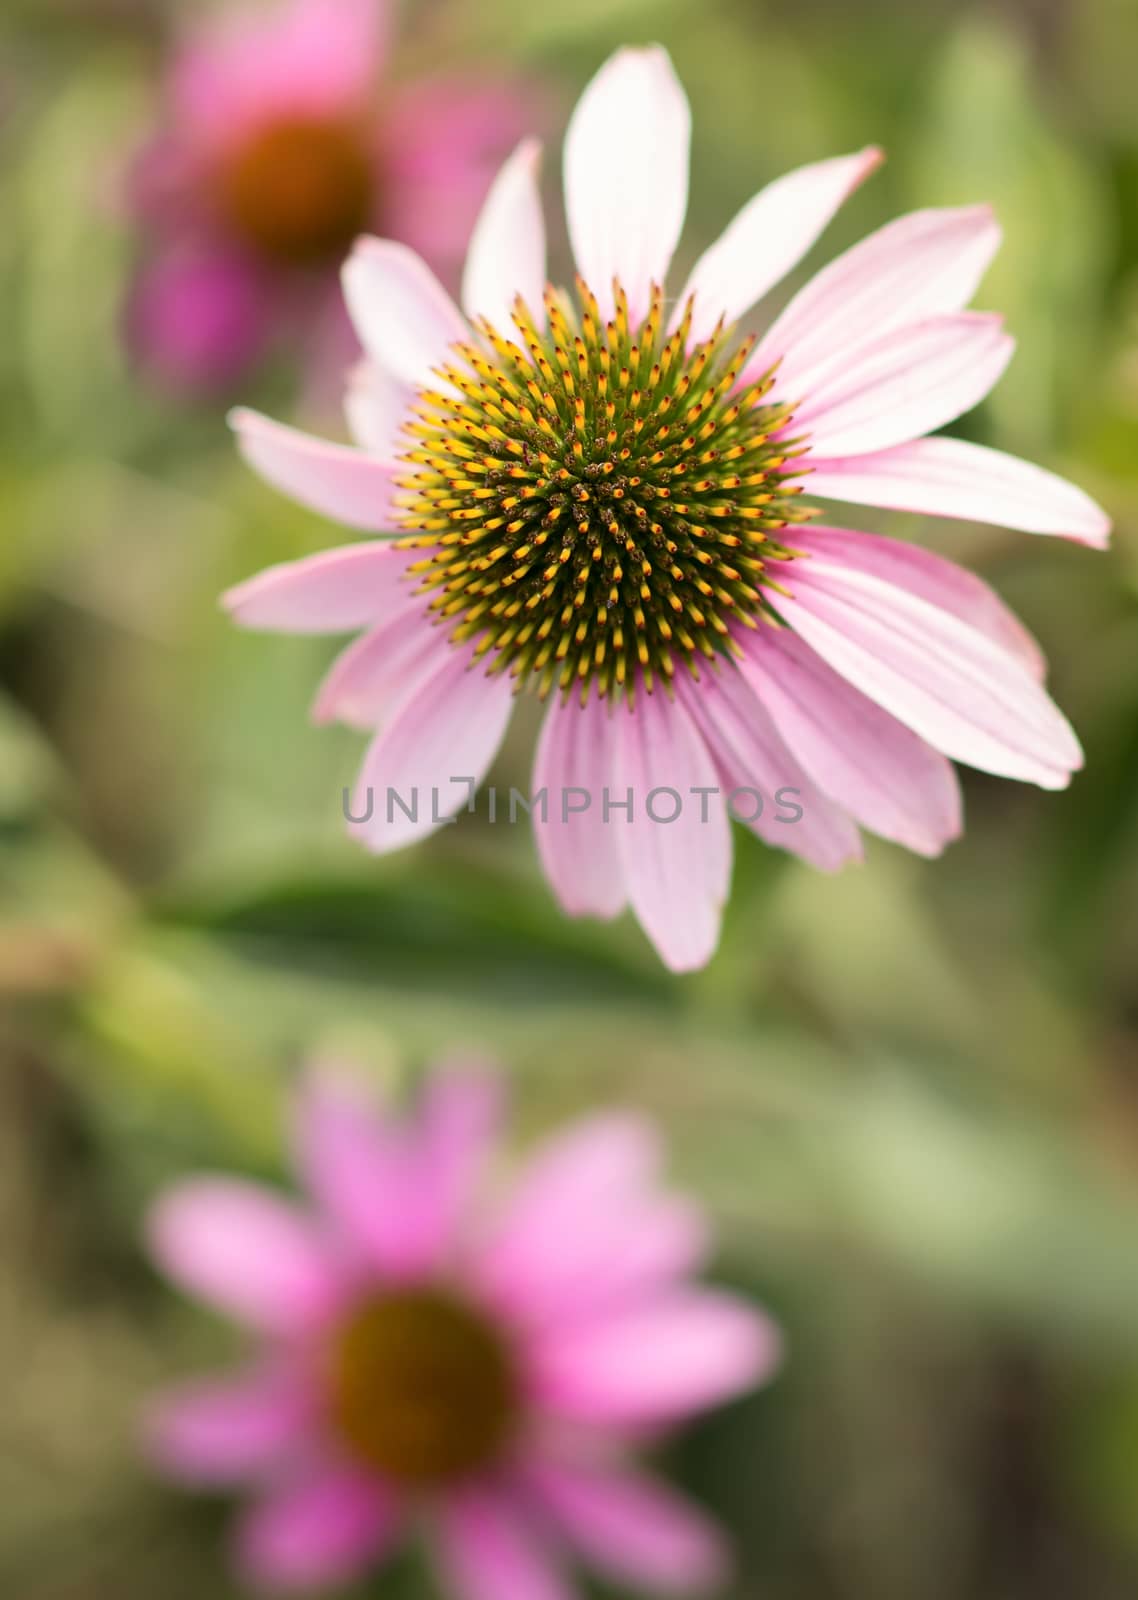 chinacea flowers against green background 